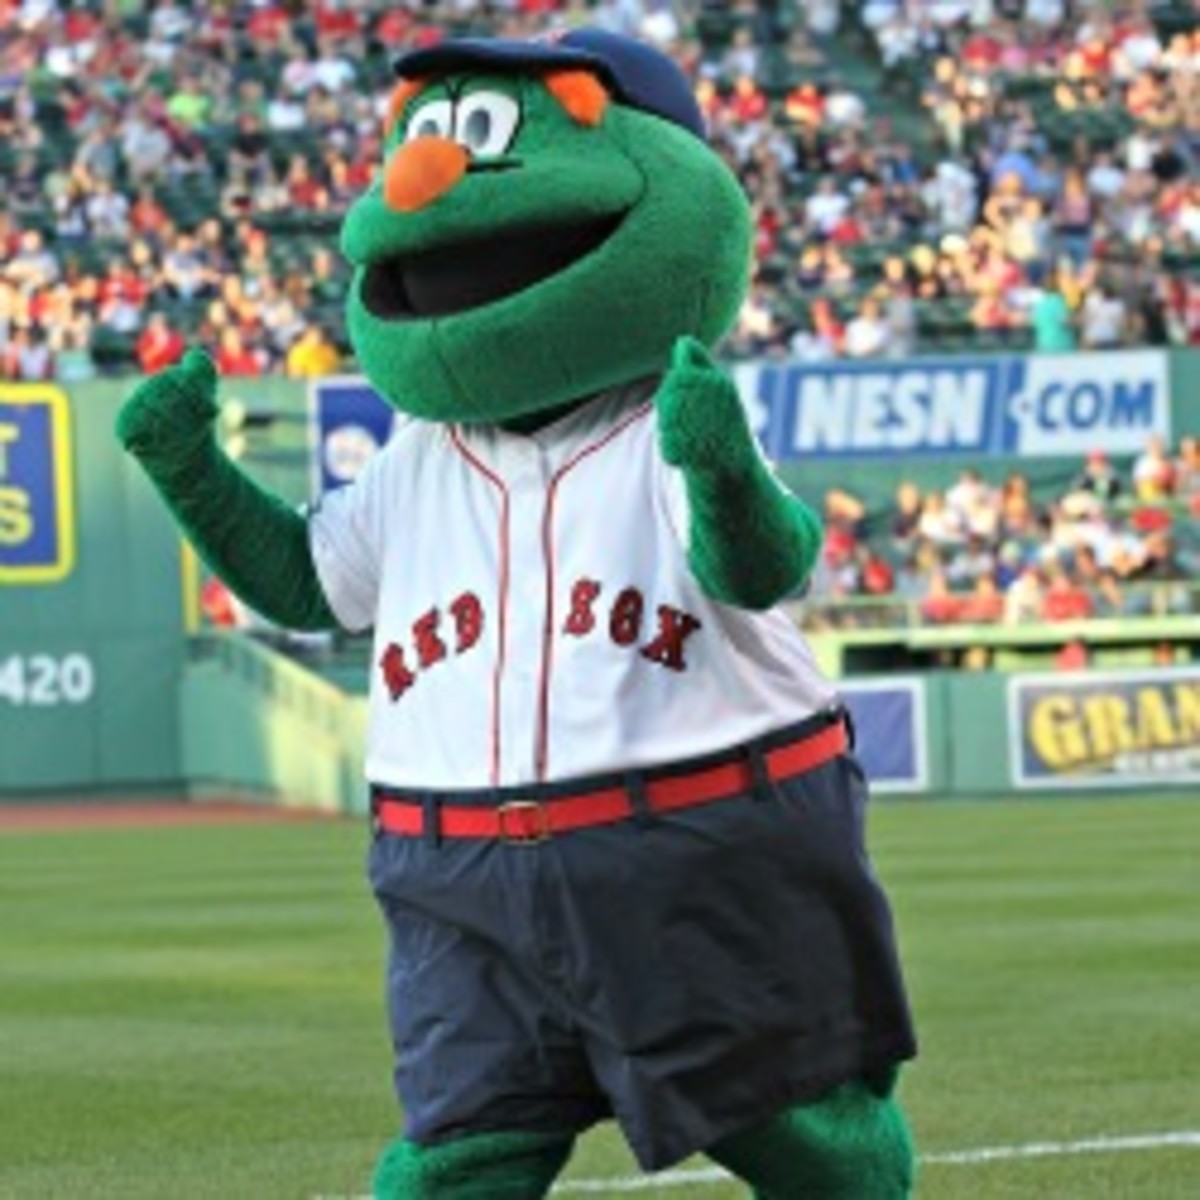 Wally the Green Monster - Wikipedia